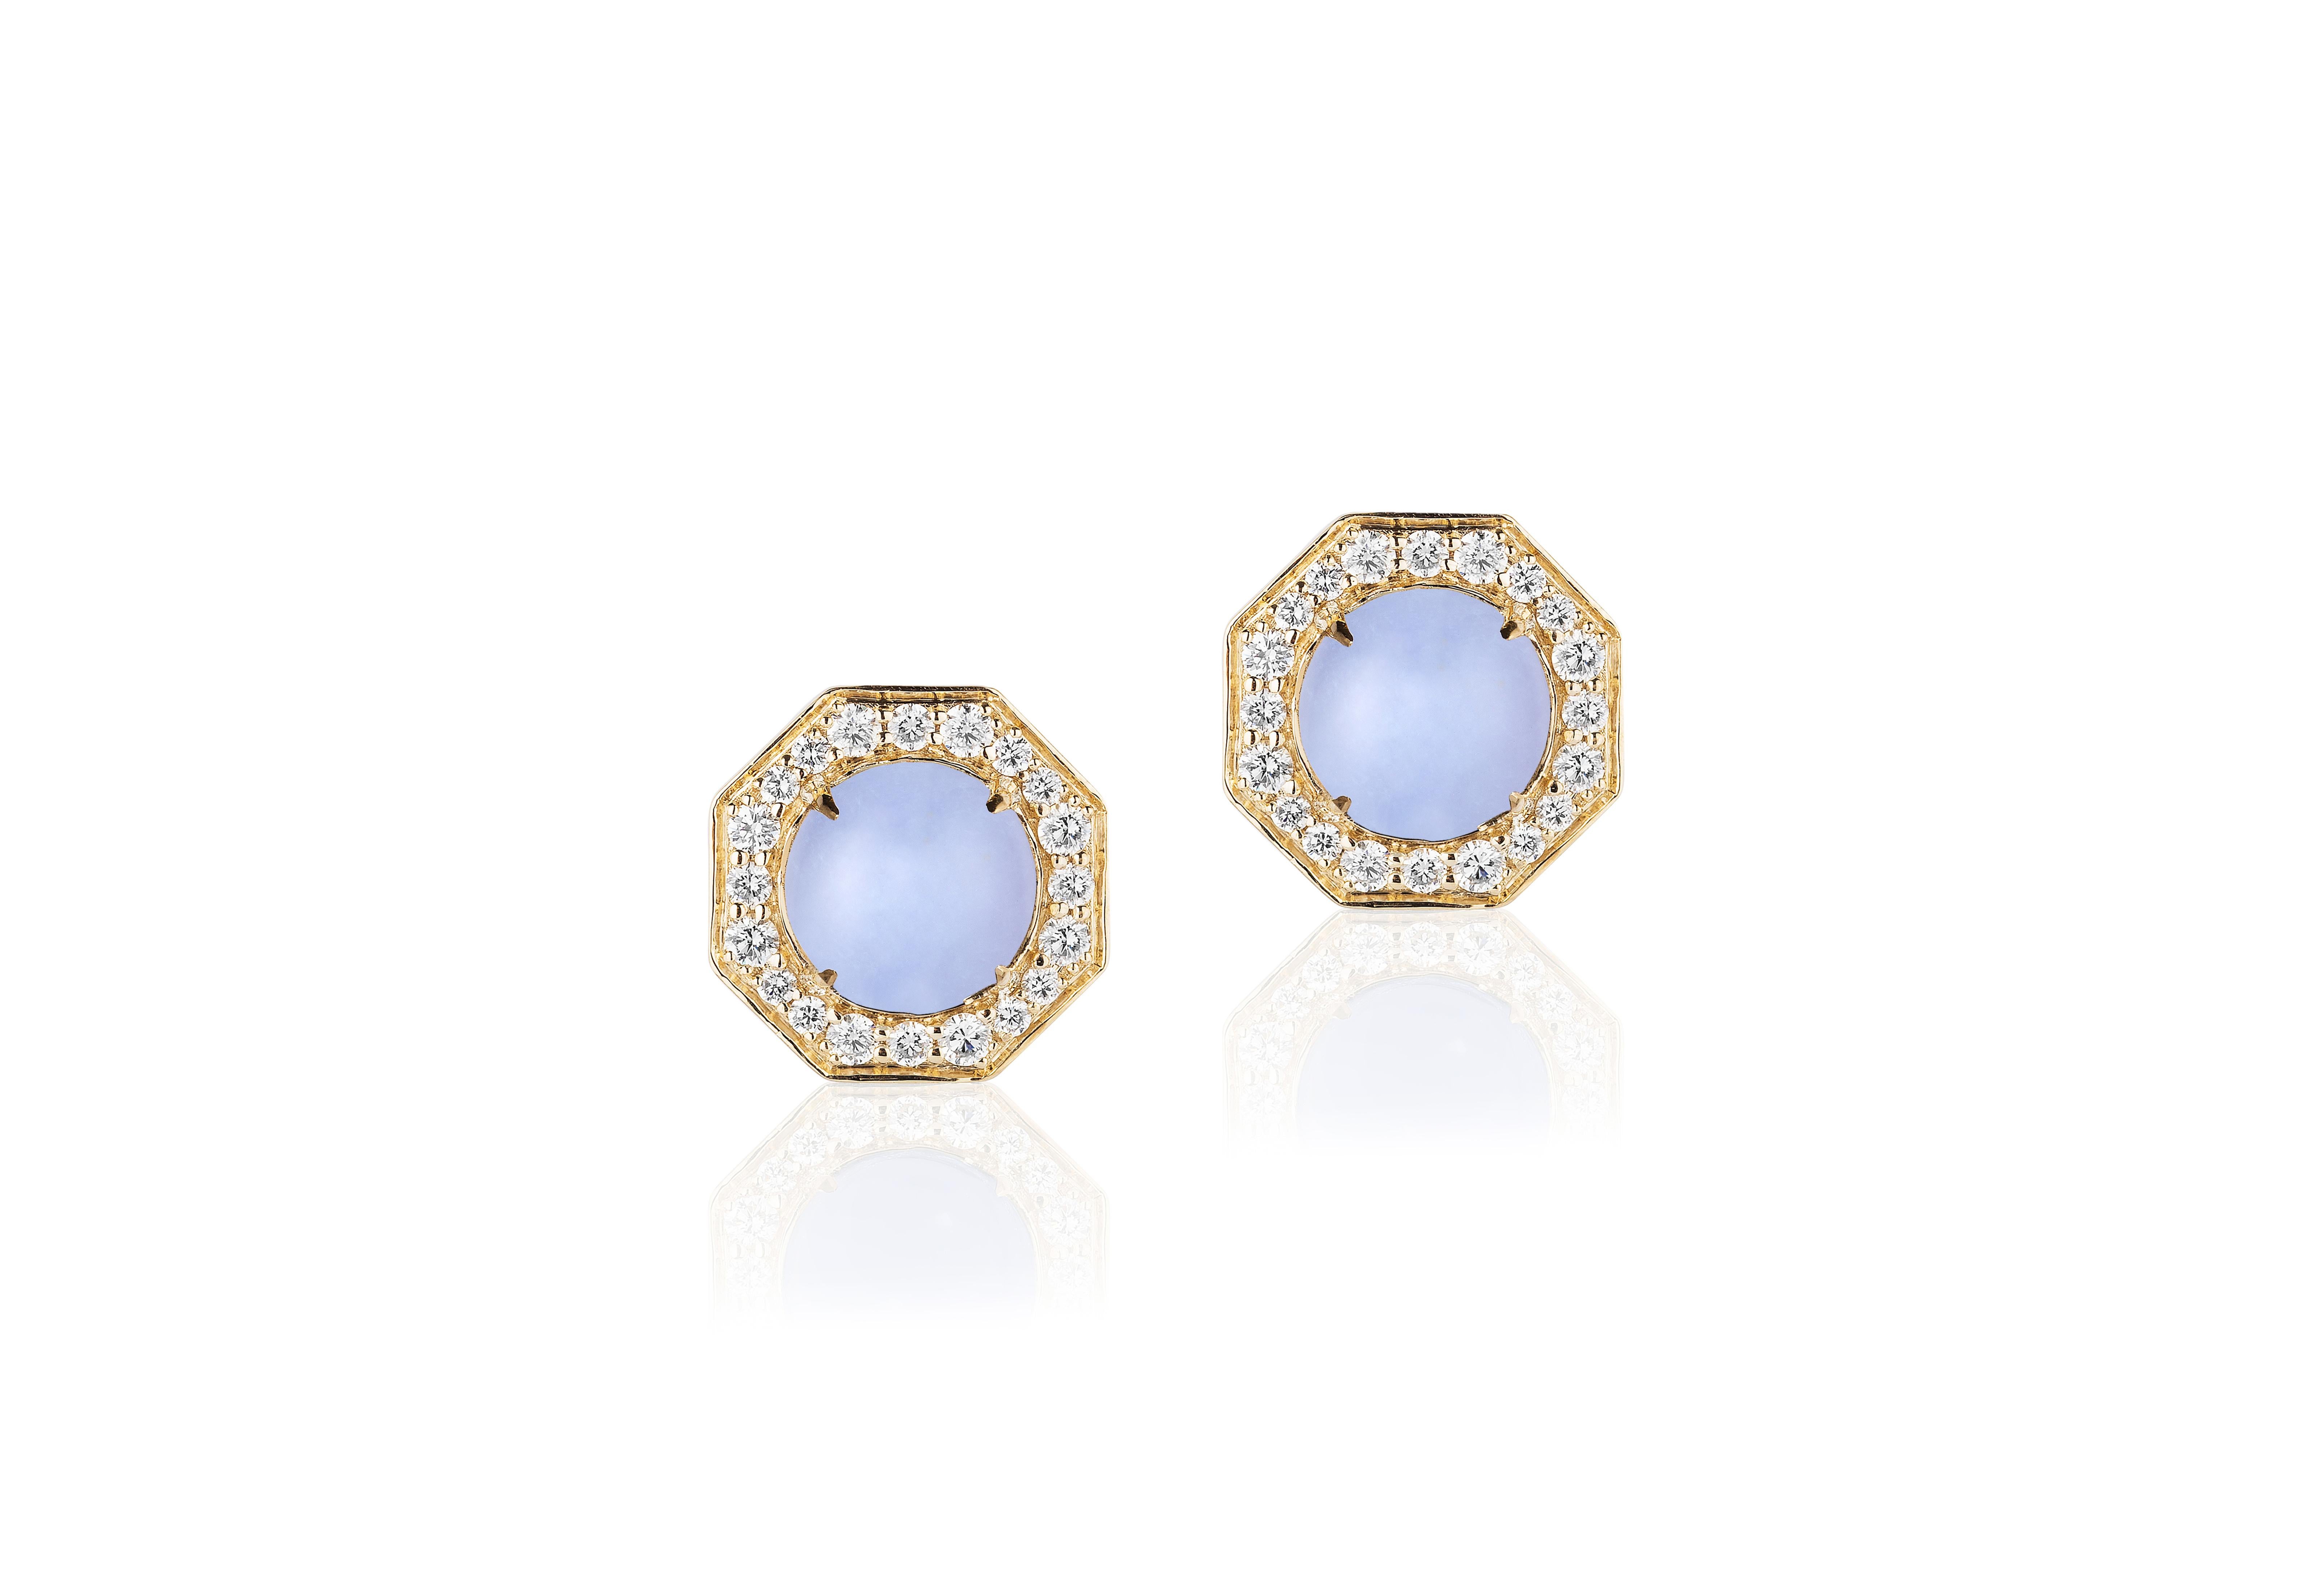 Blue Chalcedony Stud Earrings with Diamonds in 18k Yellow Gold, from 'Rock N Roll' Collection

Stone Size: 8 mm

Gemstone Weight: 4.74 Carats

Diamond: G-H / VS, Approx Wt: 0.60 Carats